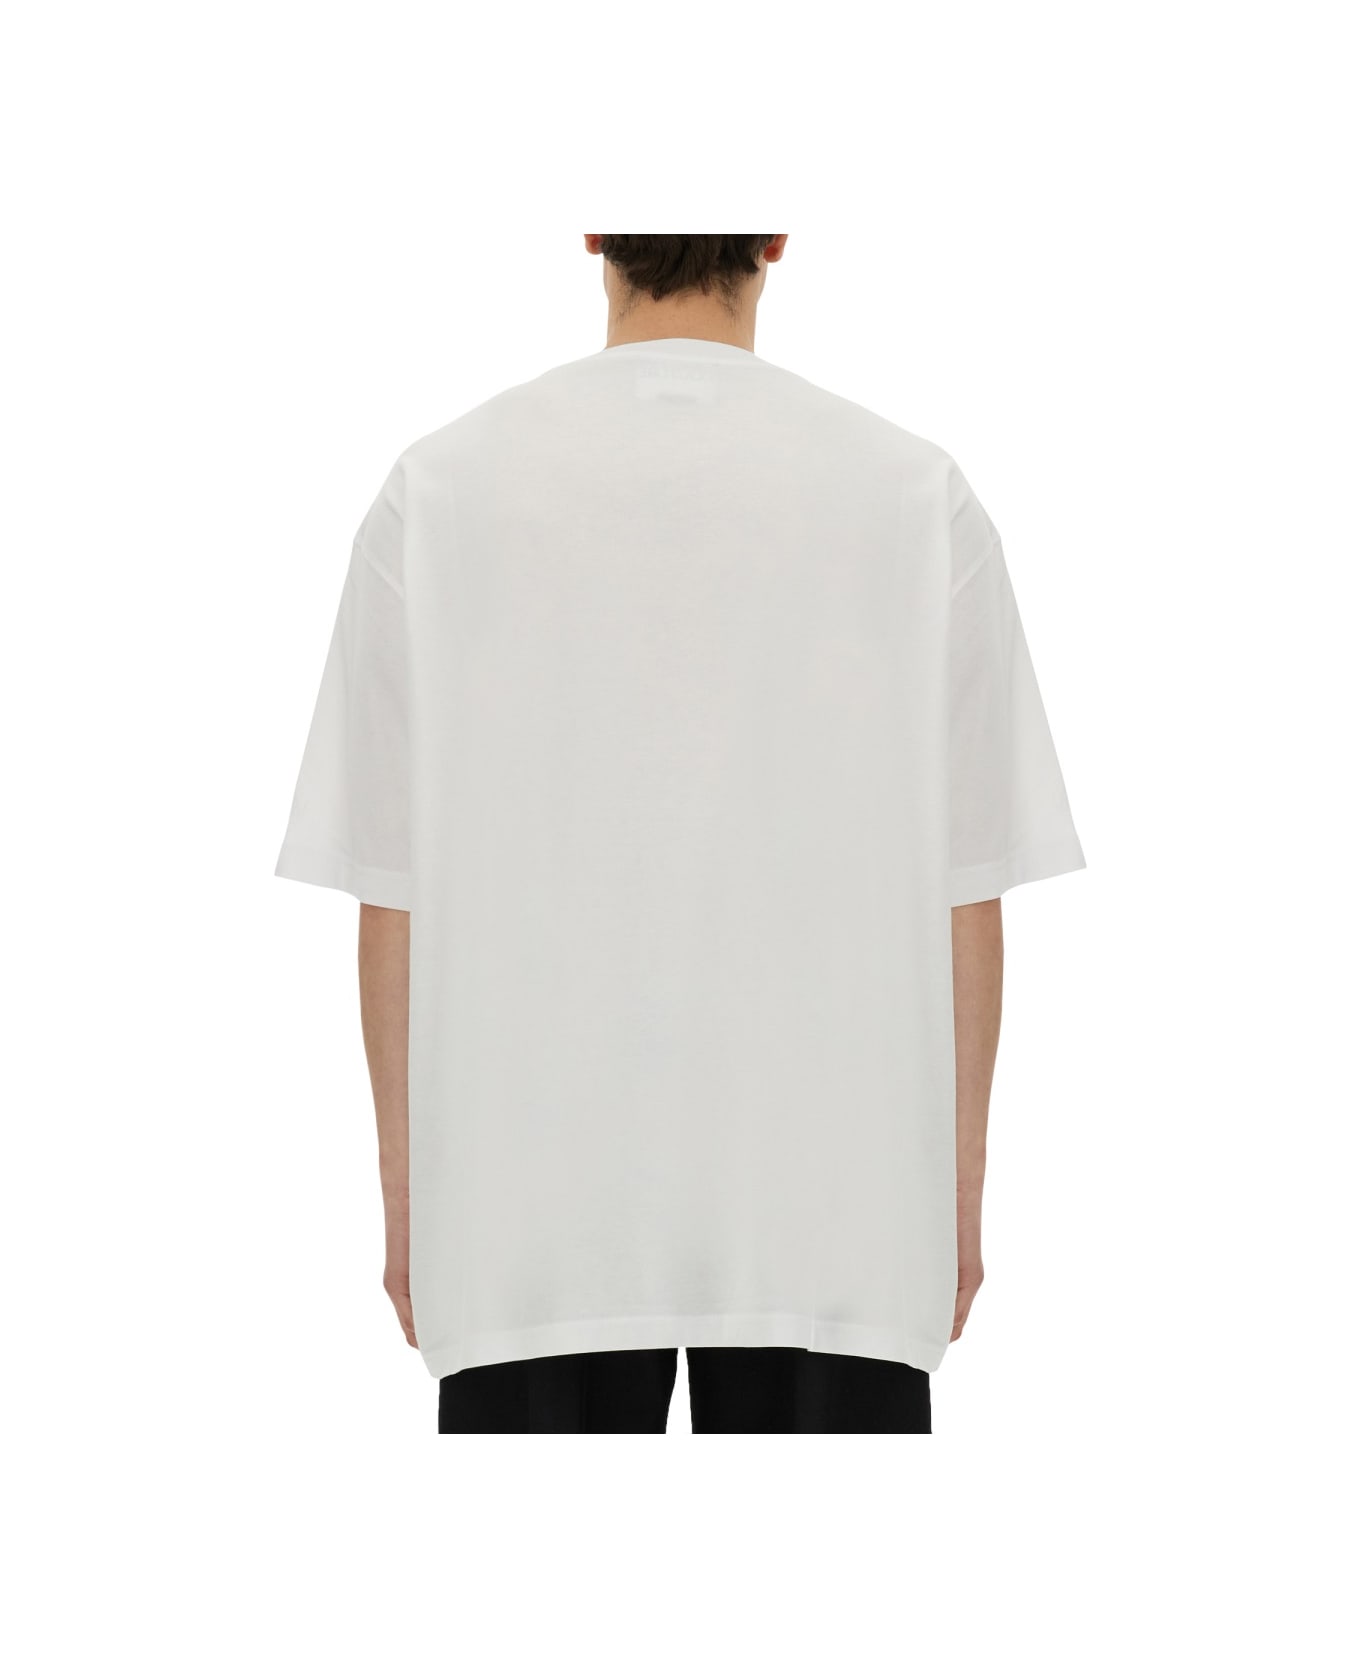 Versace Jeans Couture T-shirt With Logo - WHITE シャツ